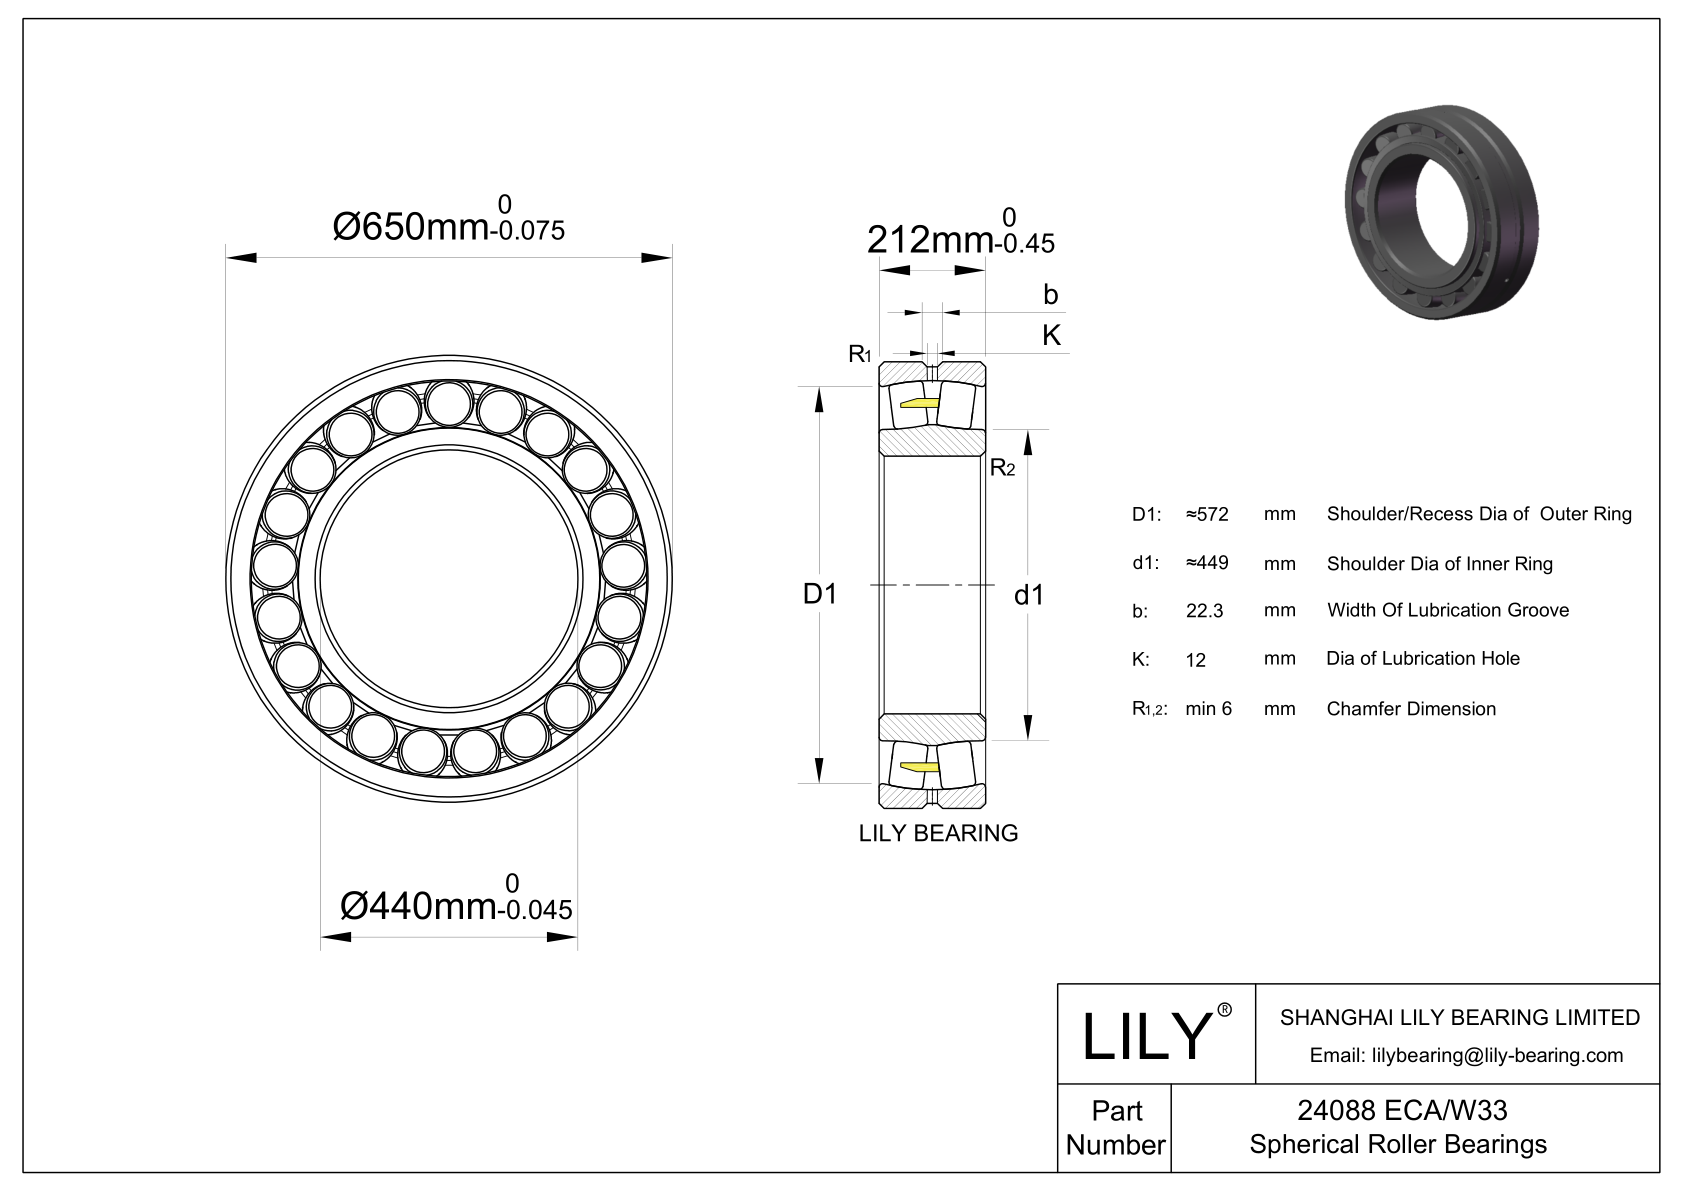 24088 ECA/W33 Double Row Spherical Roller Bearing cad drawing